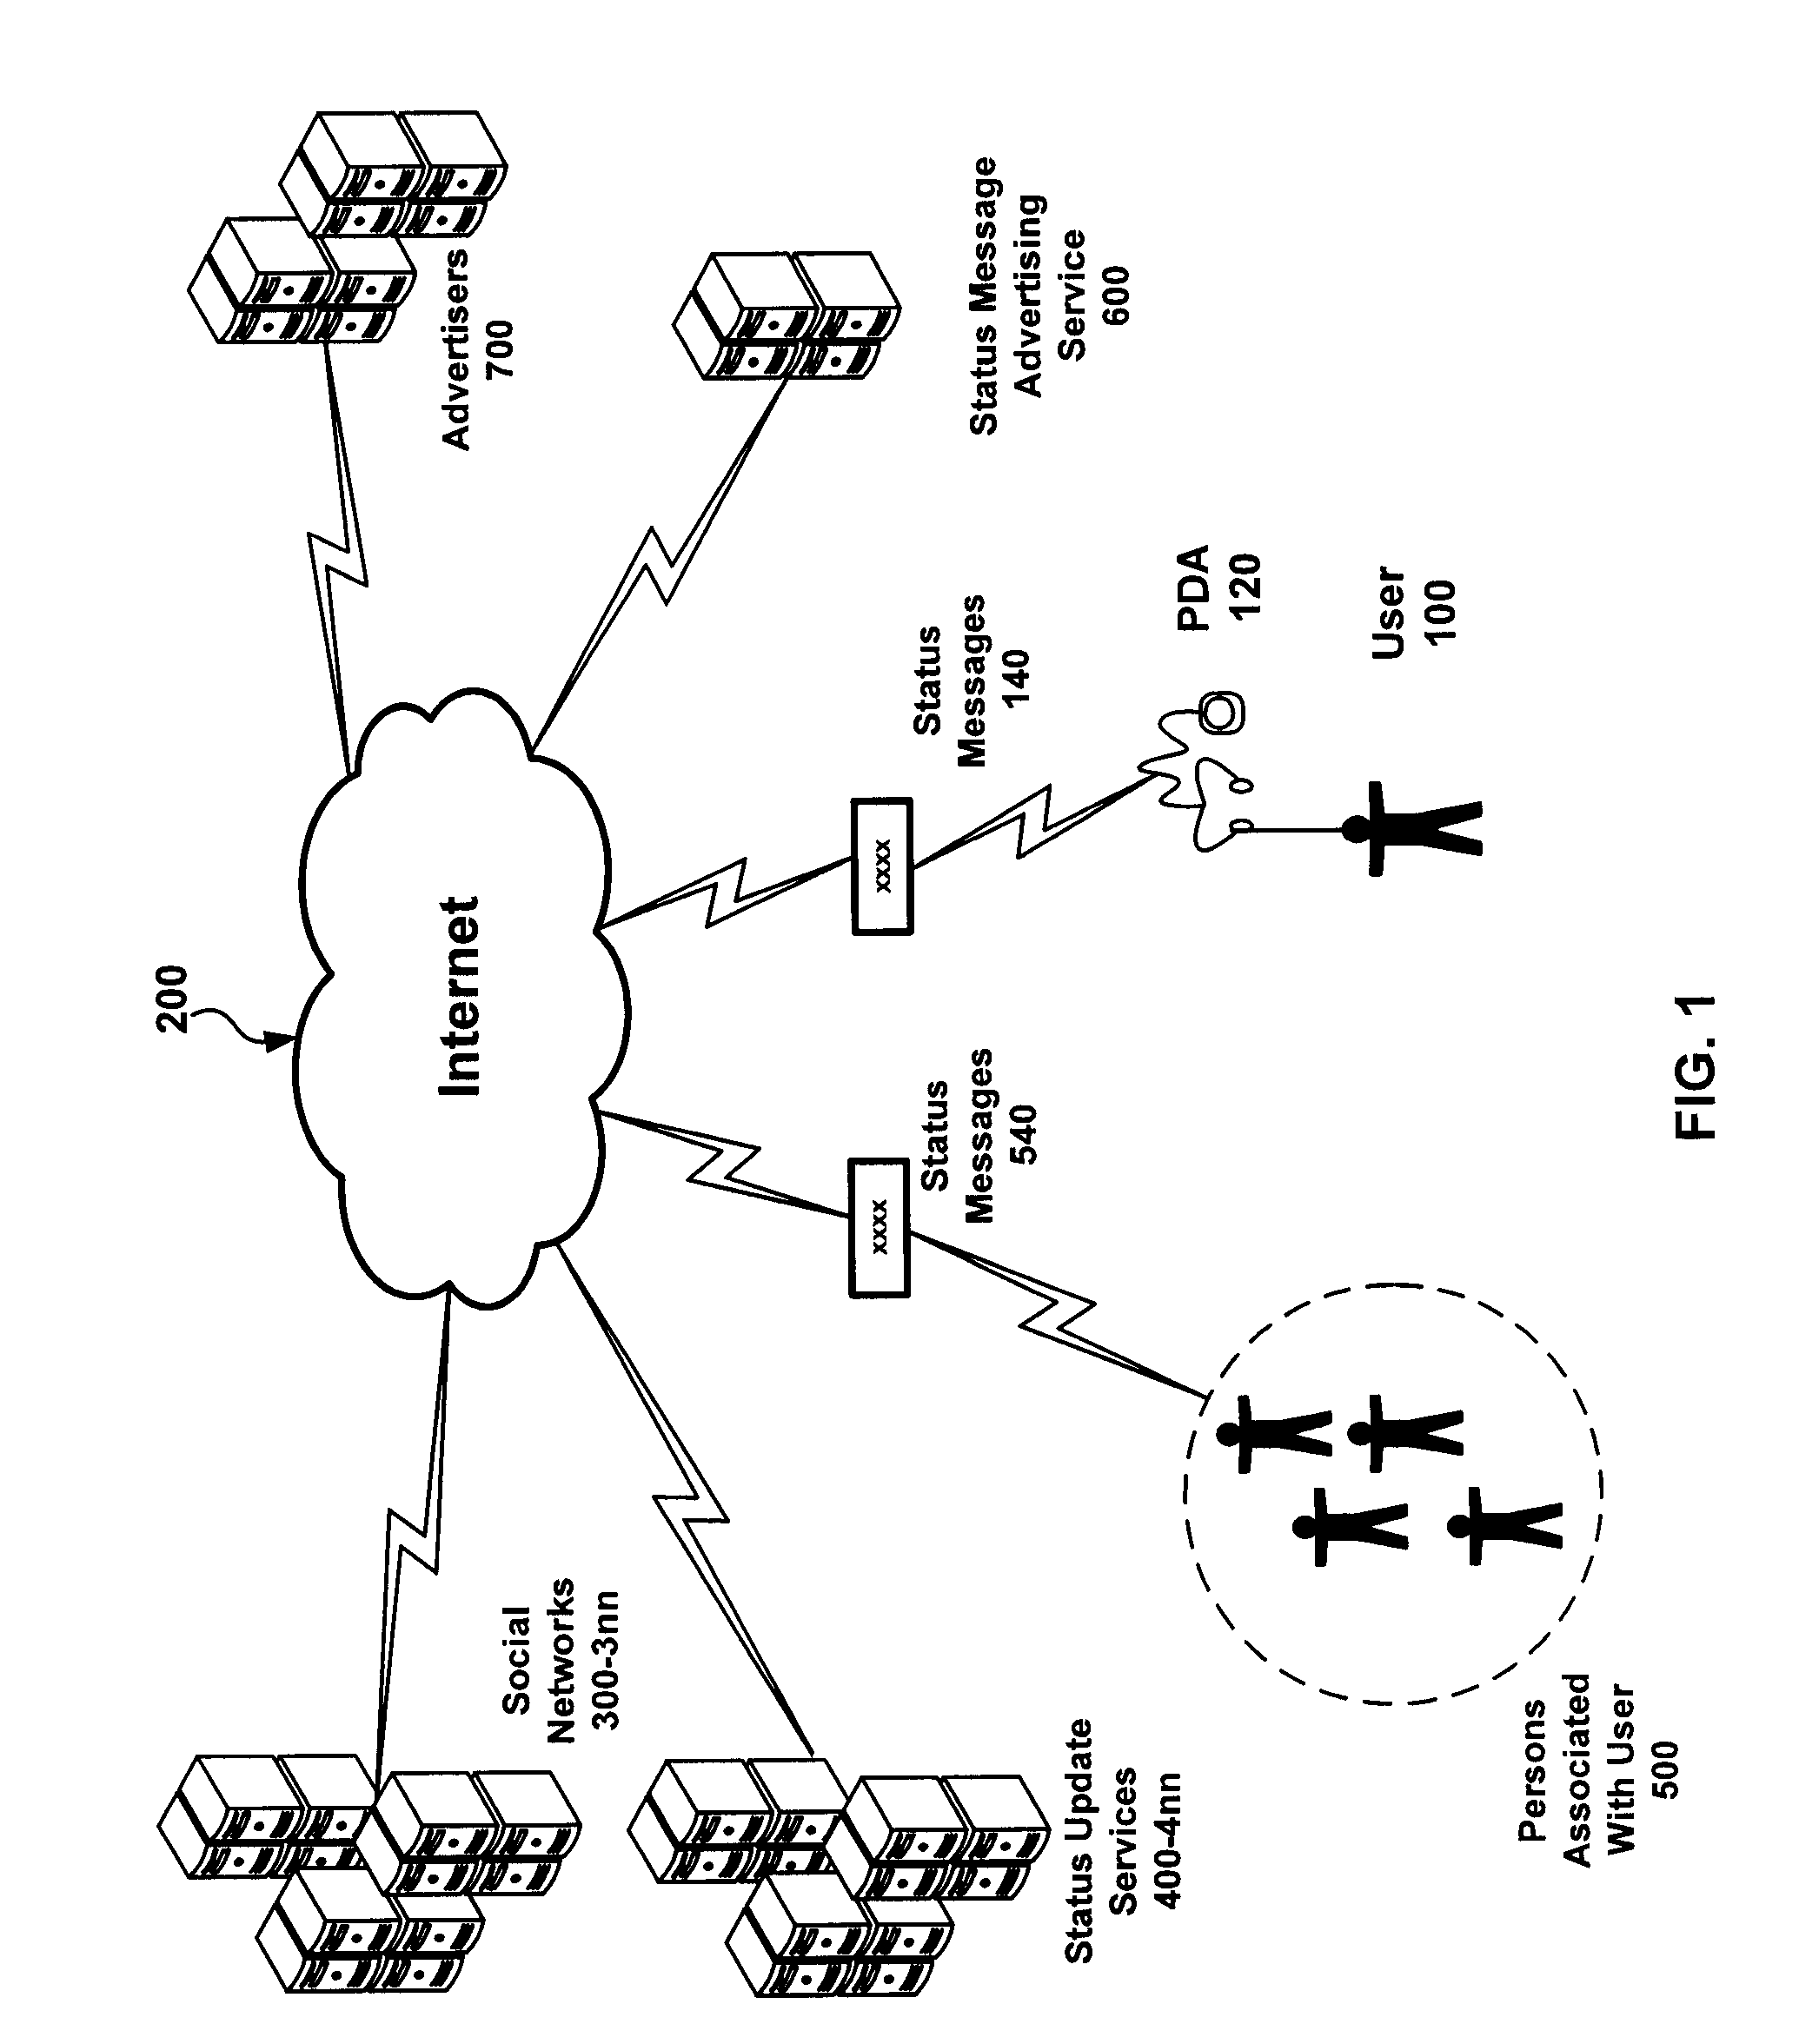 System and method for contextual advertising based on status messages